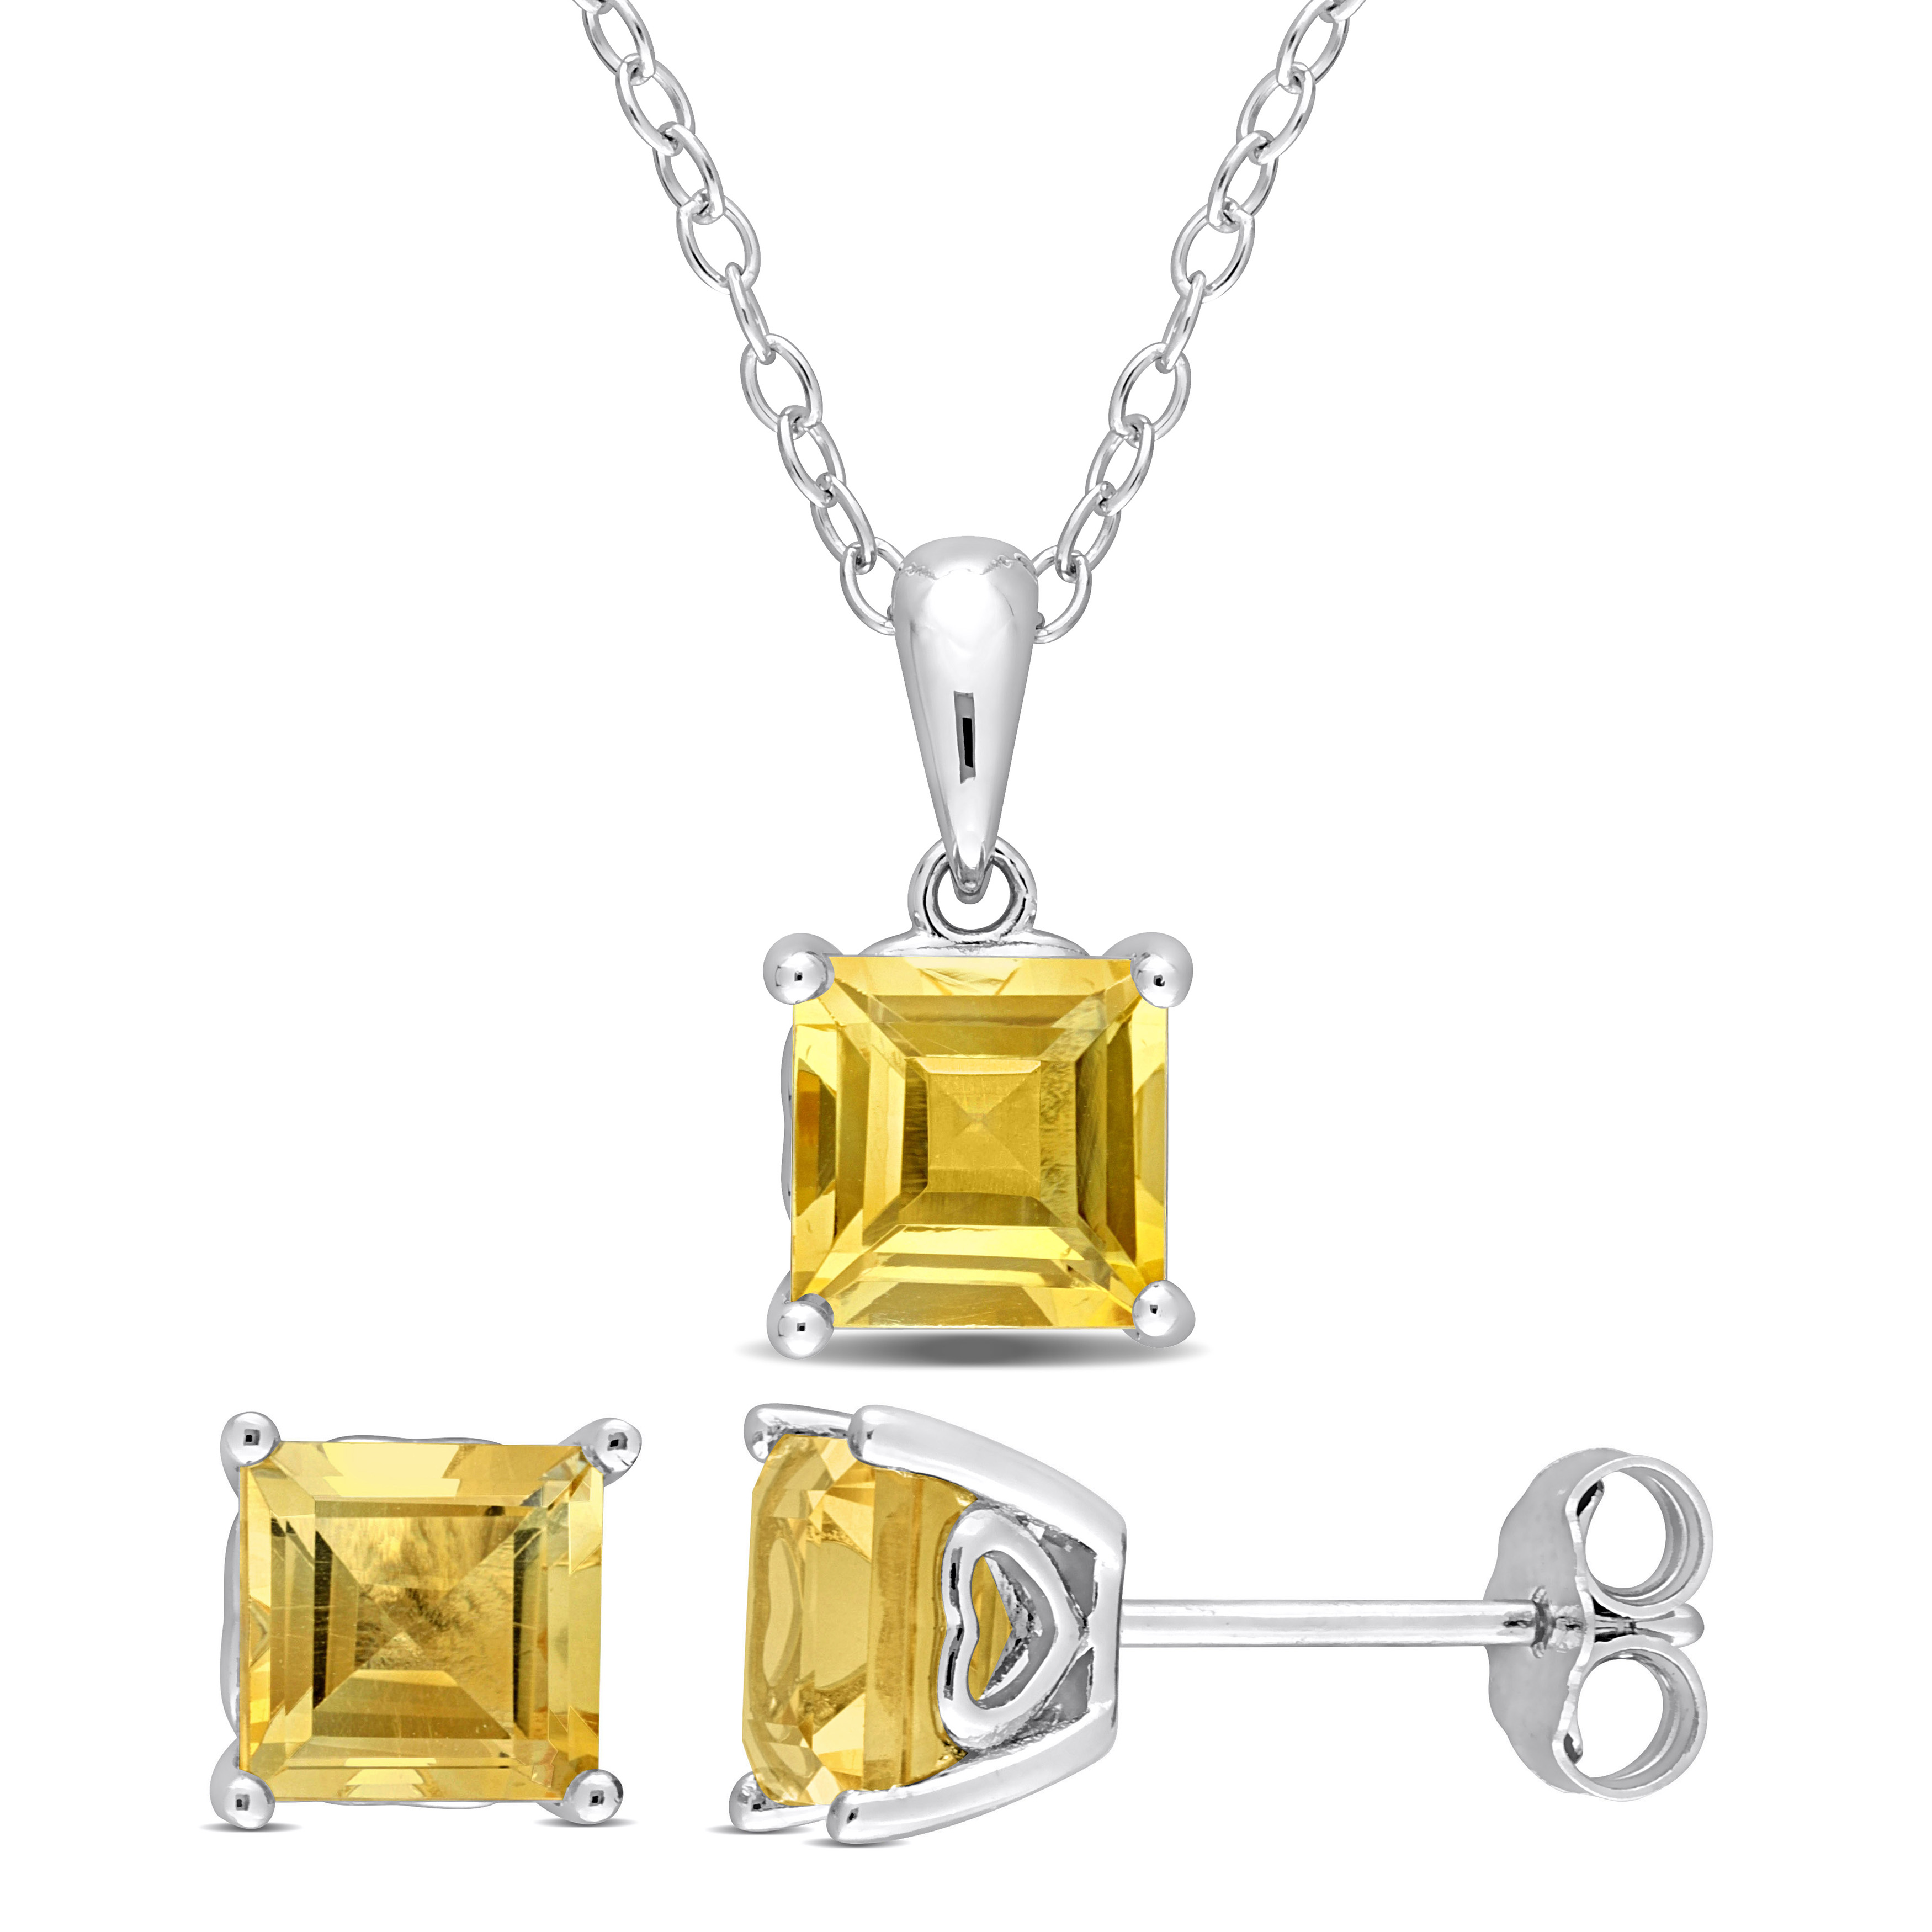 3 1/6 CT TGW Square Citrine 2-Piece Set of Pendant with Chain and Earrings in Sterling Silver